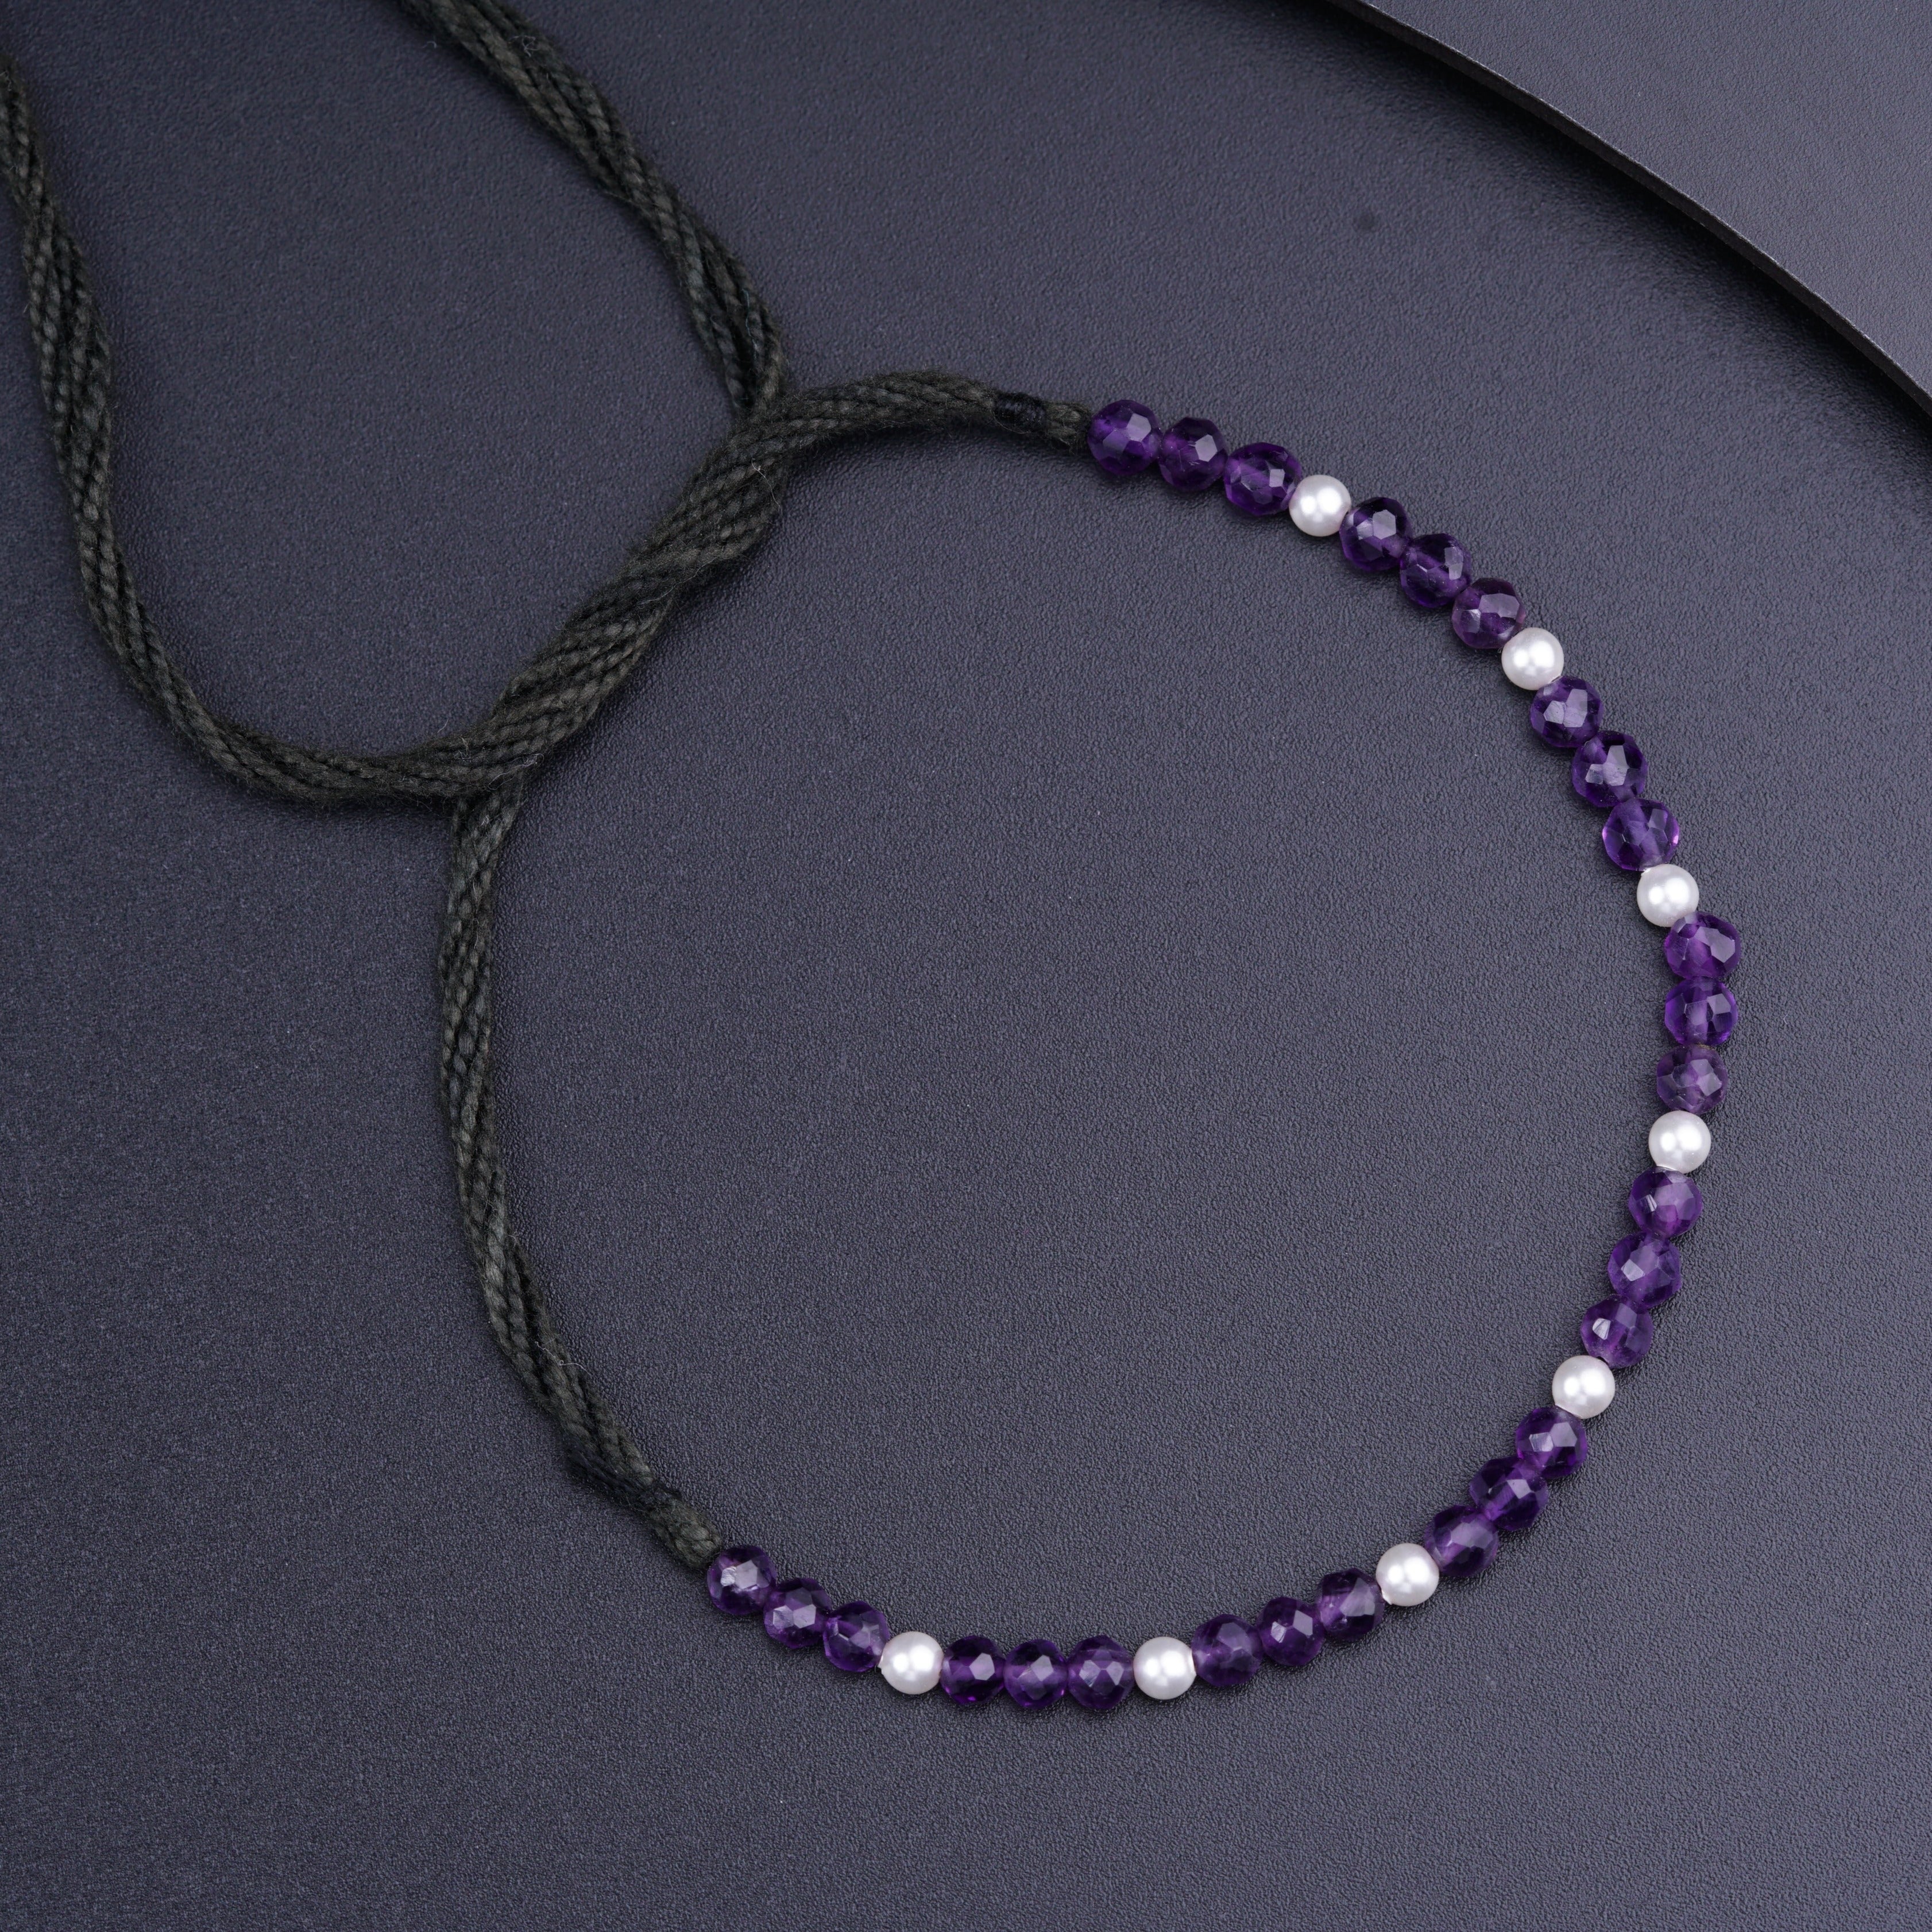 a purple beaded necklace with white pearls